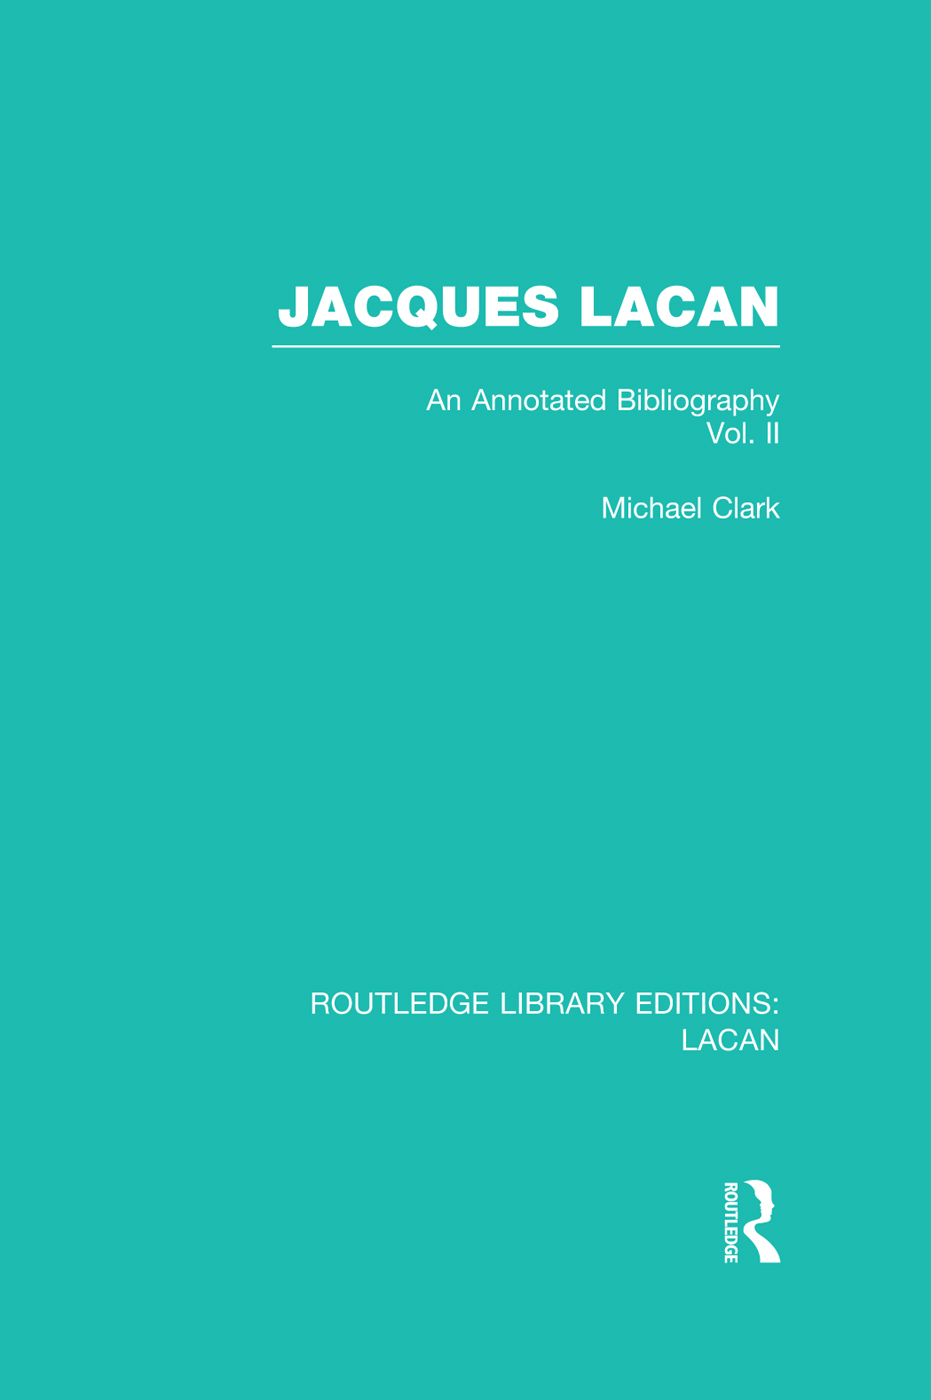 Jacques Lacan an annotated bibliography - image 1